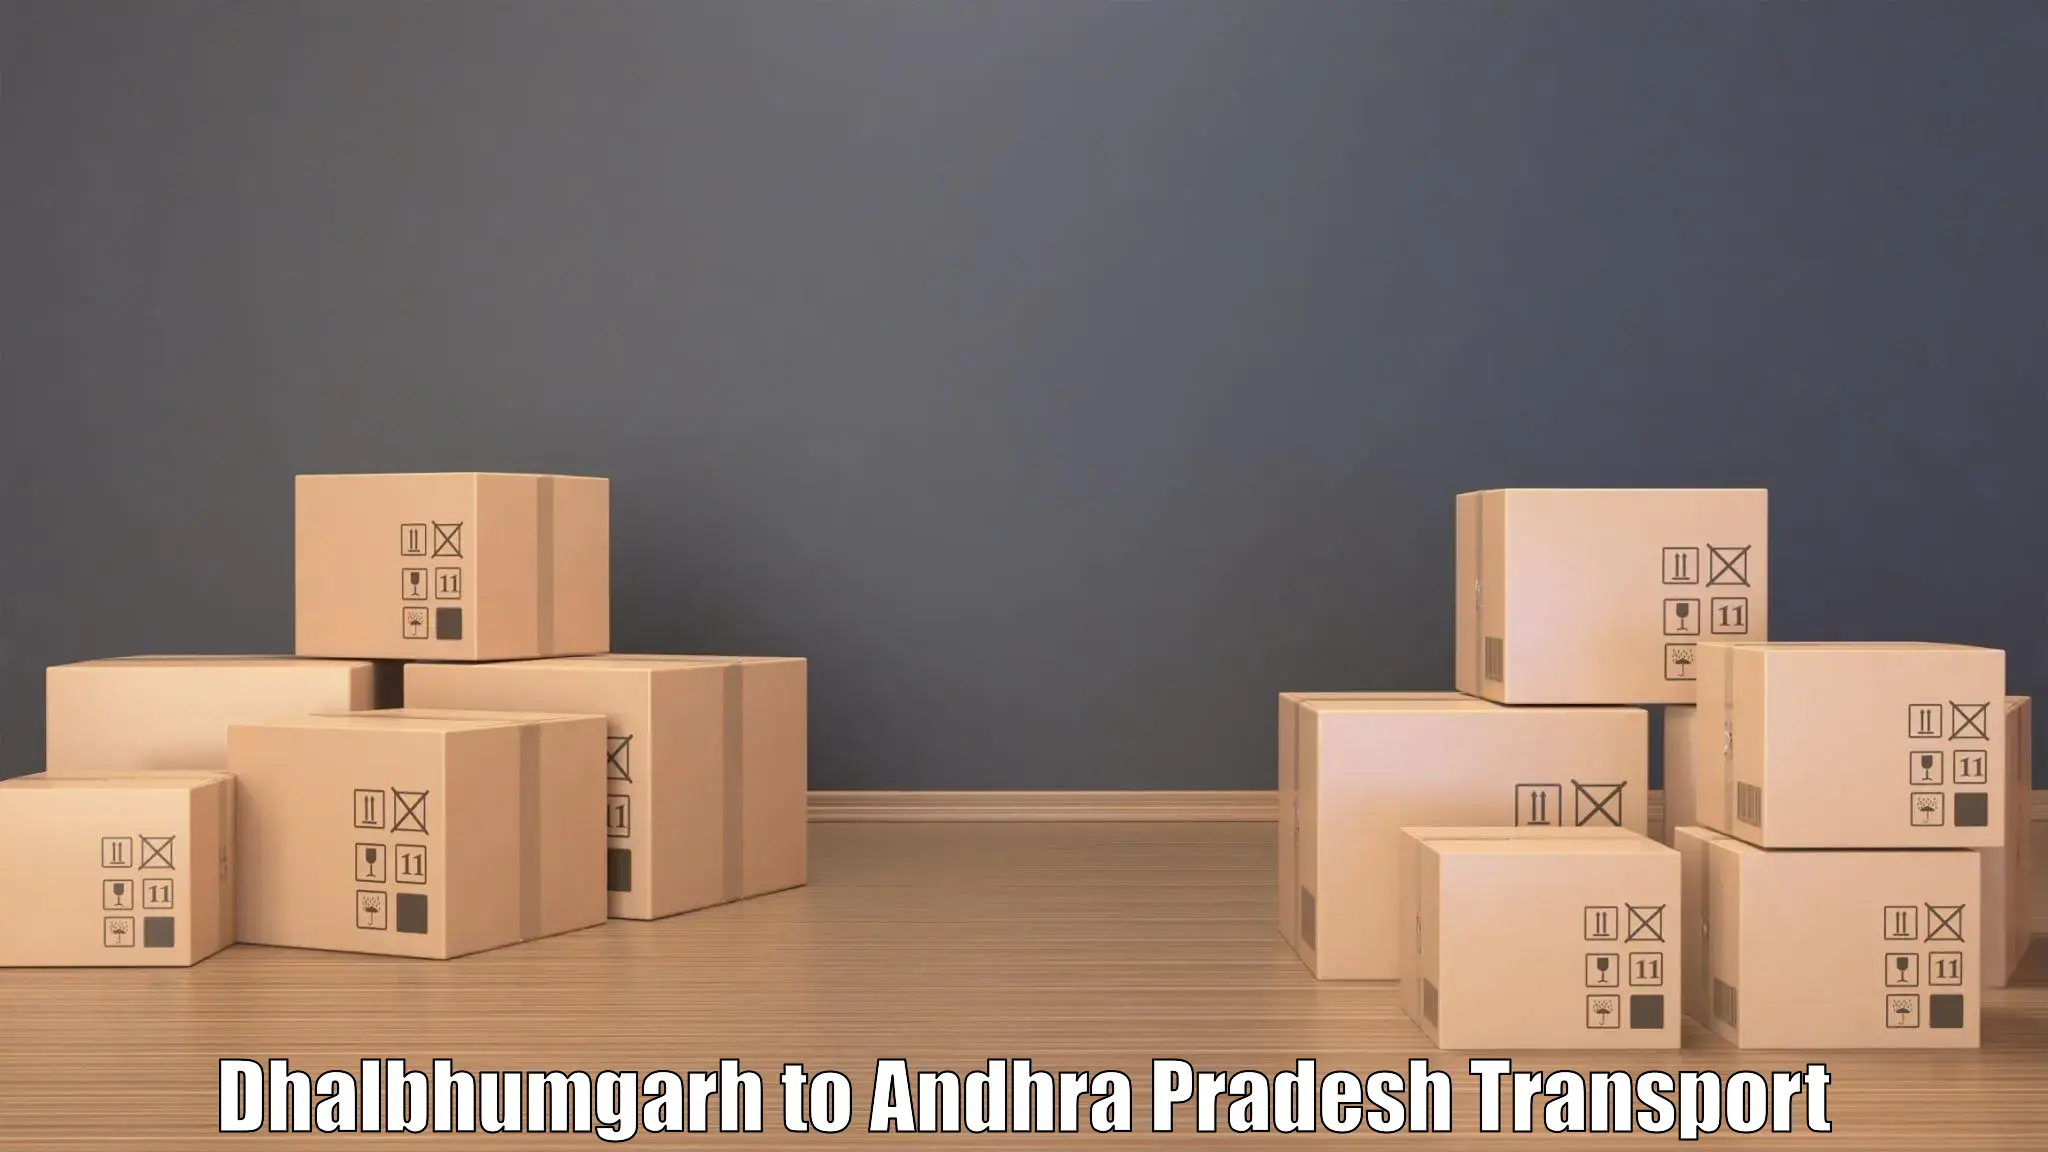 Cargo train transport services in Dhalbhumgarh to Srisailam